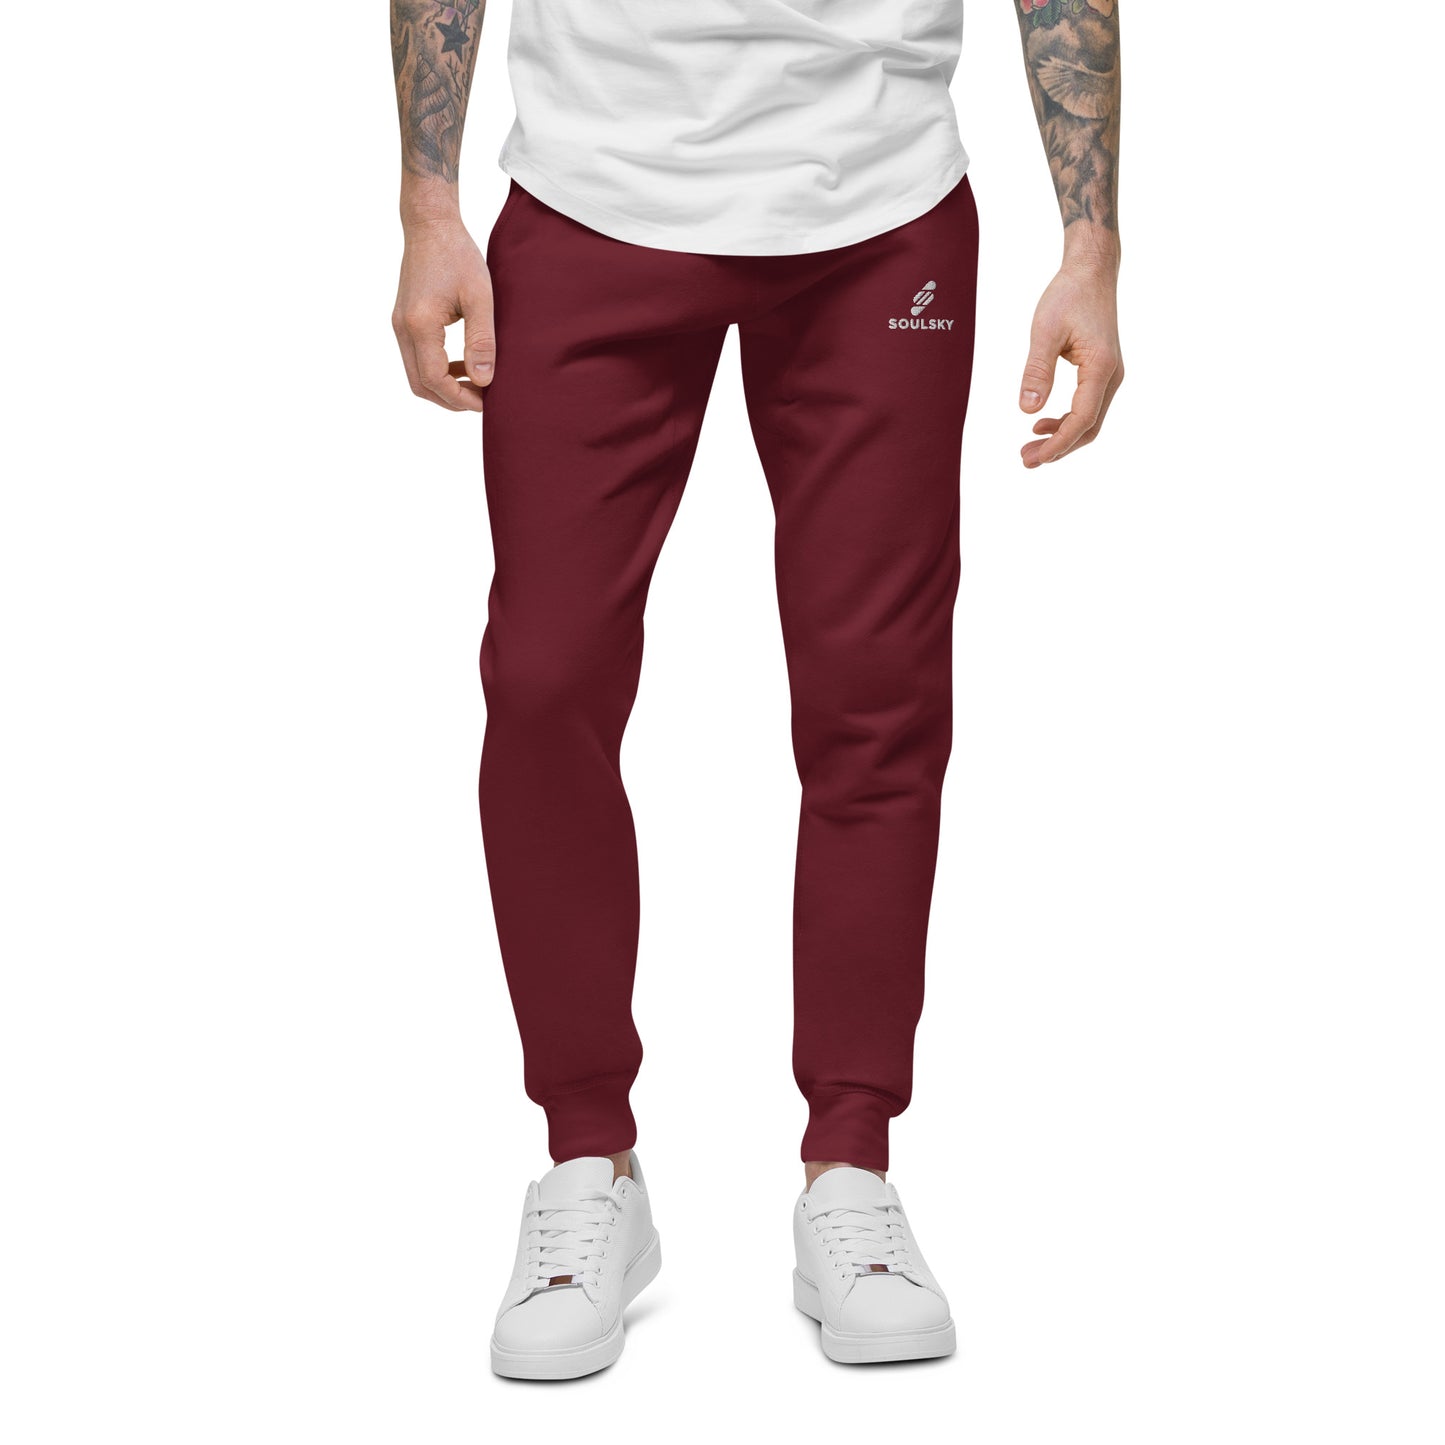 Male model wearing maroon unisex joggers with white embroidered logo on left thigh that says "SOULSKY".